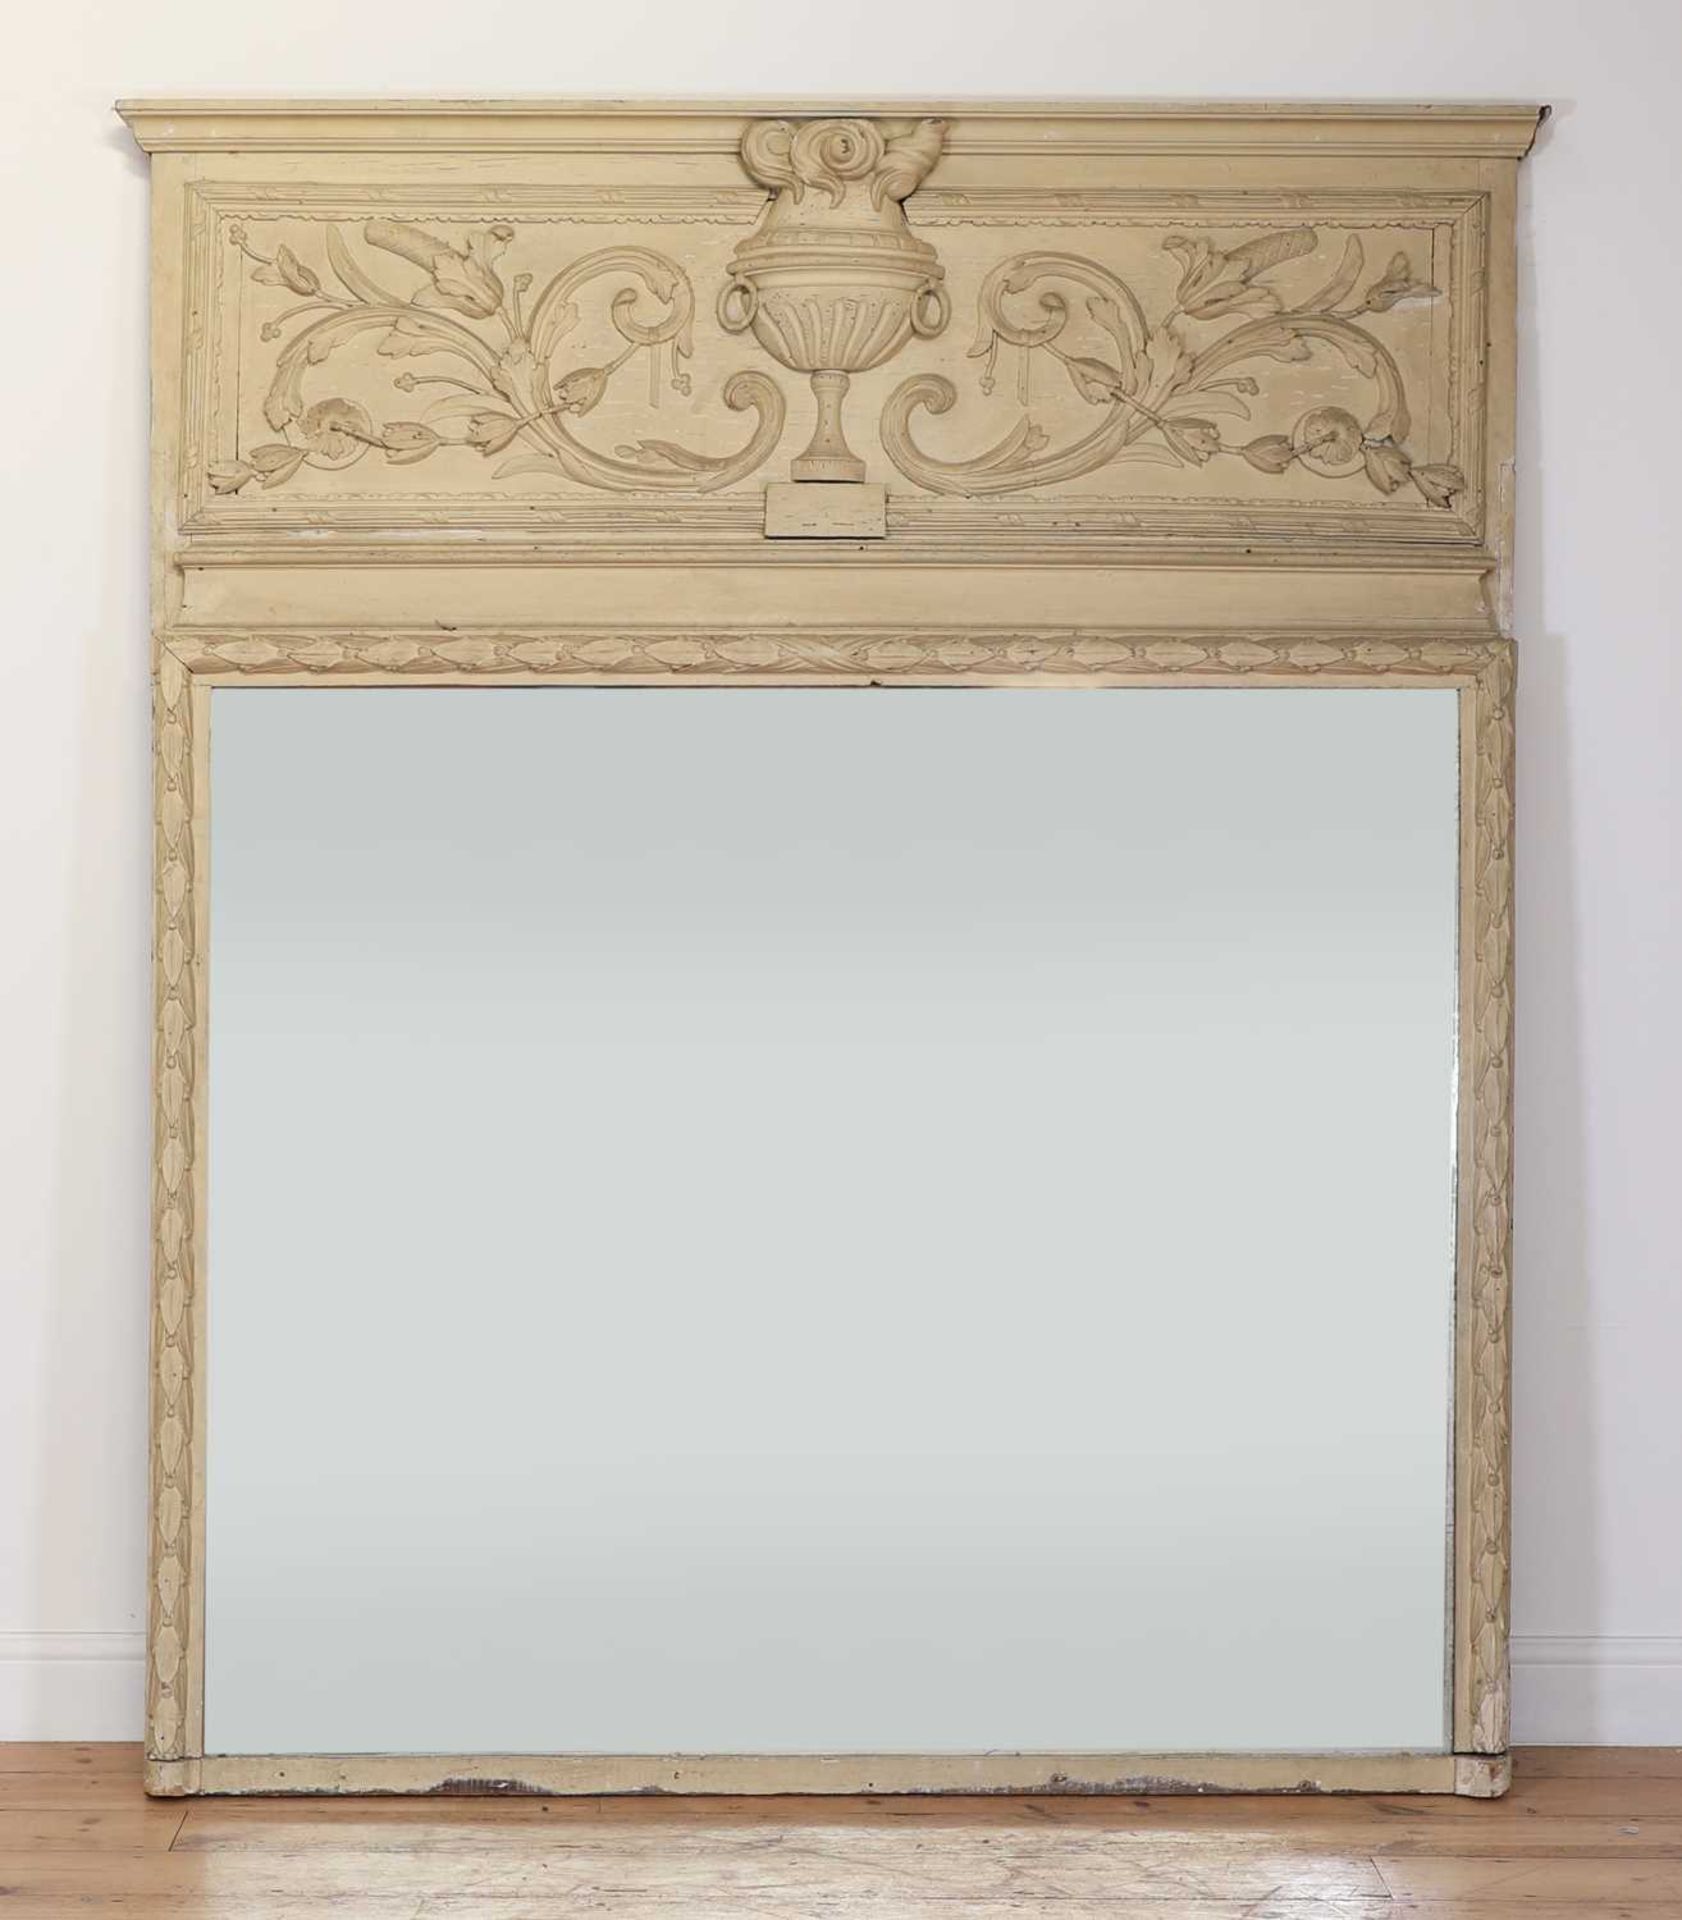 A painted wood trumeau mirror